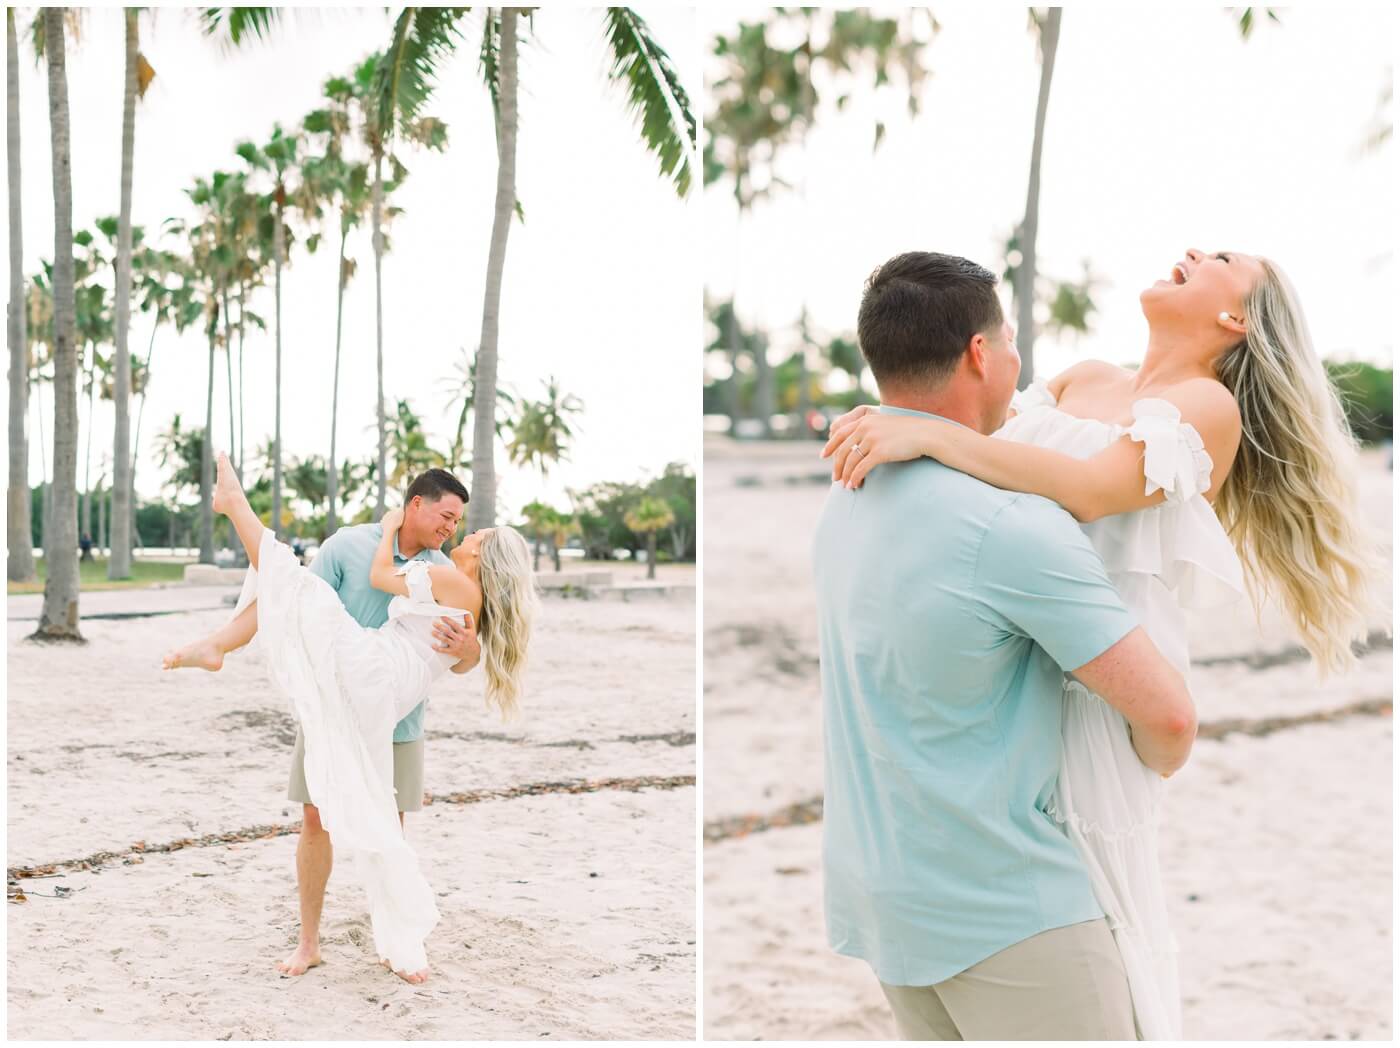 Wedding photographer in Miami | Couple smiles together on the beach in Miami